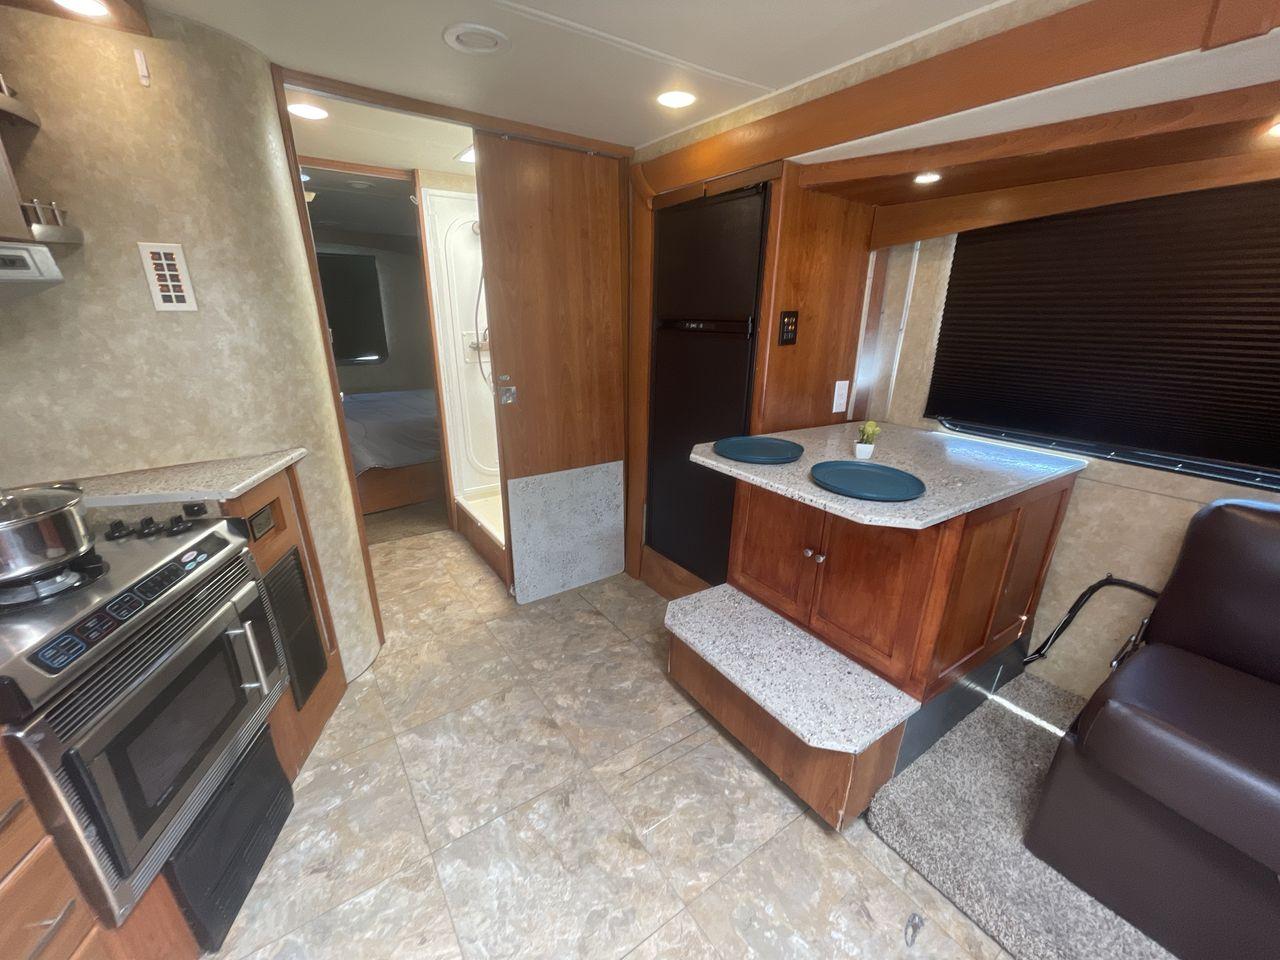 2008 TAN COACHMEN LEPRECHAUN 320DS E-450 (1FDXE45S08D) with an 6.8L V10 SOHC 20V engine, Length: 31.5 ft. | Dry Weight: 12,555 lbs. | Gross Weight: 14,500 lbs. | Slides: 2 transmission, located at 4319 N Main Street, Cleburne, TX, 76033, (817) 221-0660, 32.435829, -97.384178 - Photo #13